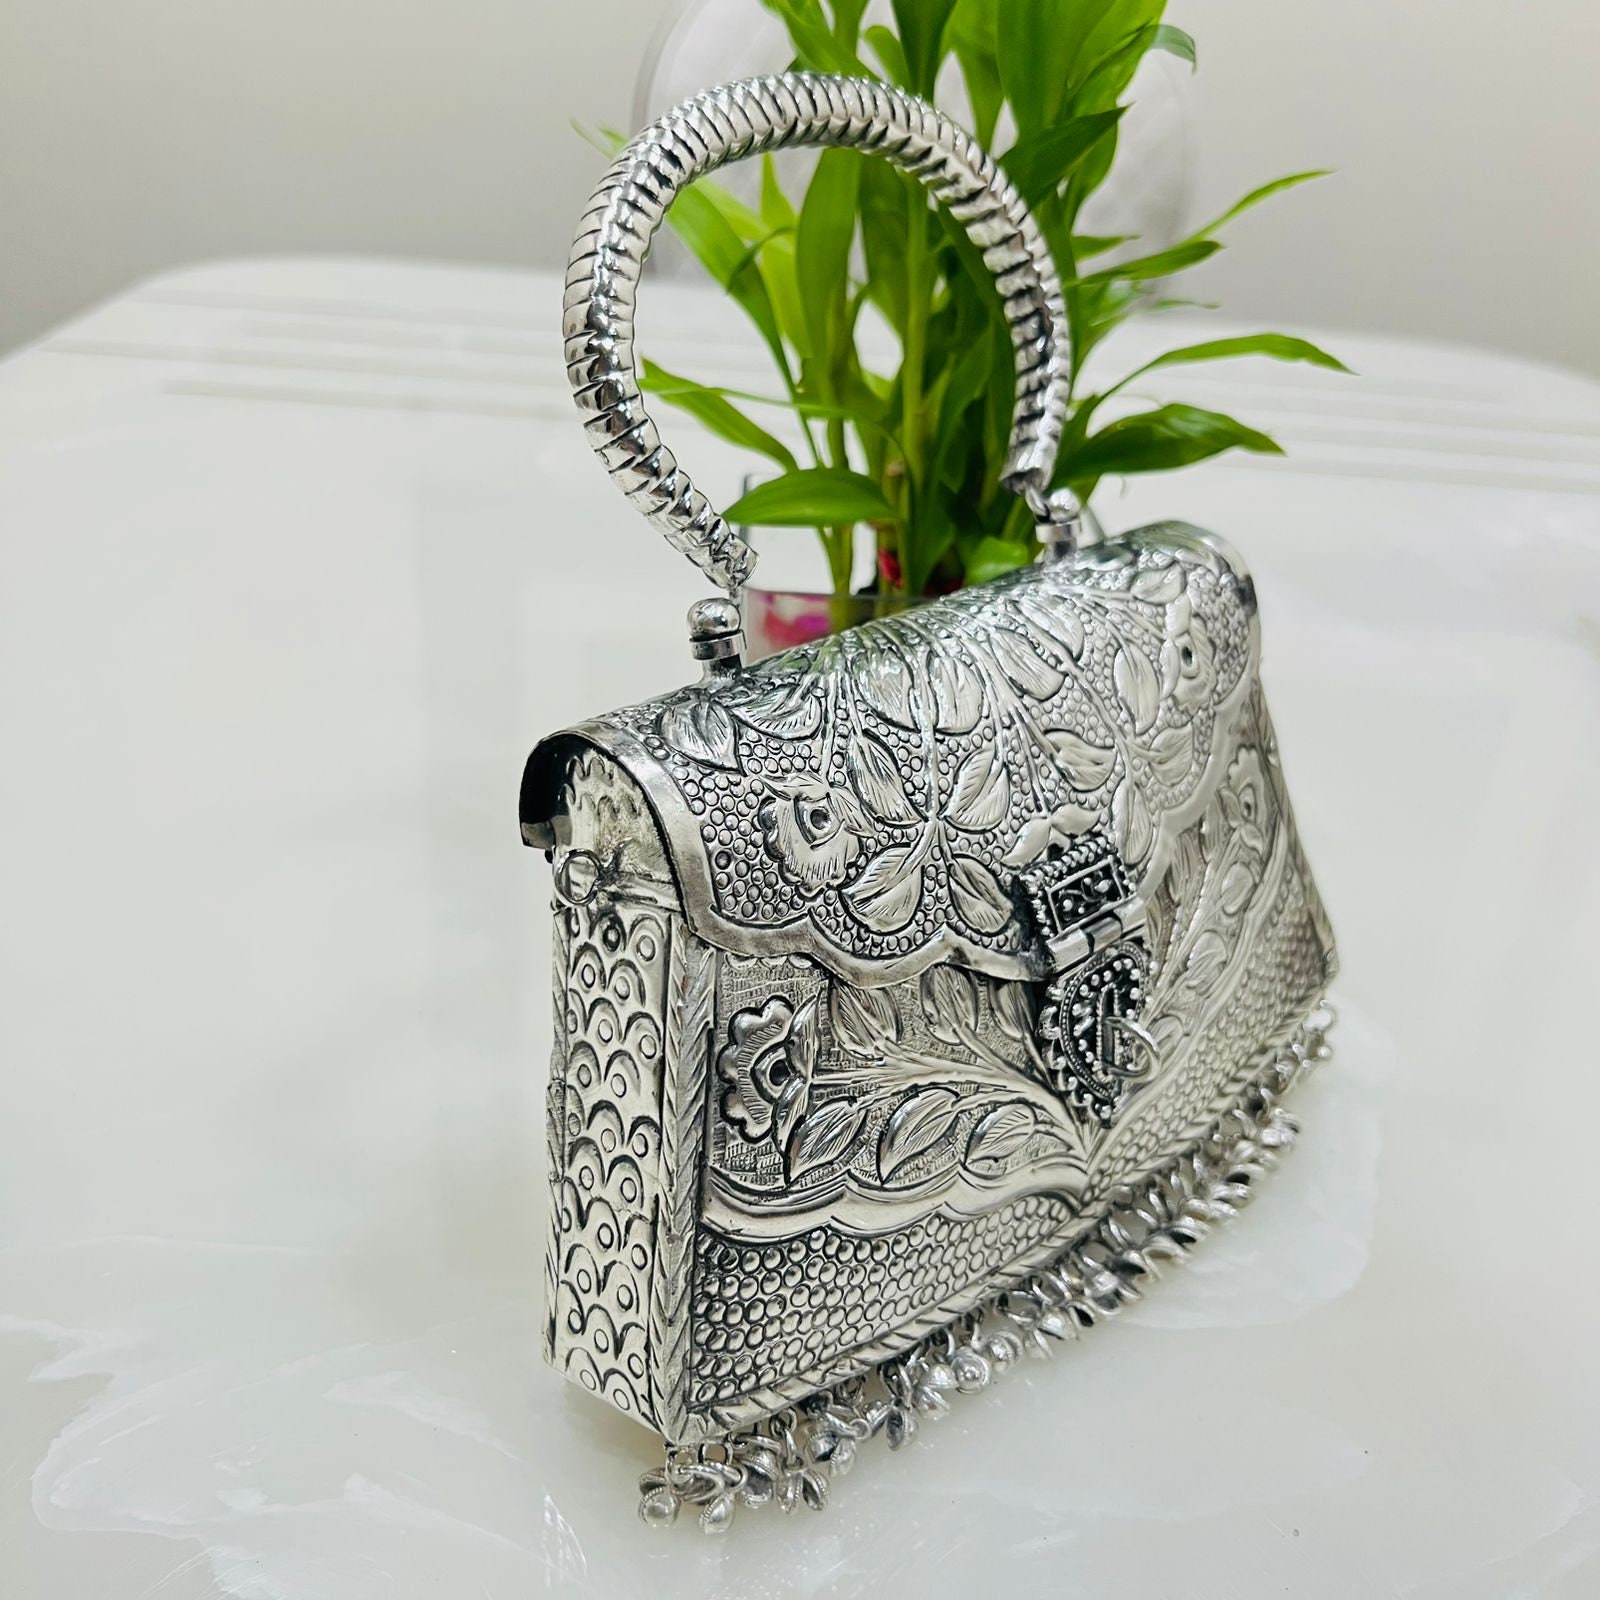 SKB Stylish & Fancy Evening Party Bridal Wedding Clutch Purse Silver Online  in India, Buy at Best Price from Firstcry.com - 13893414